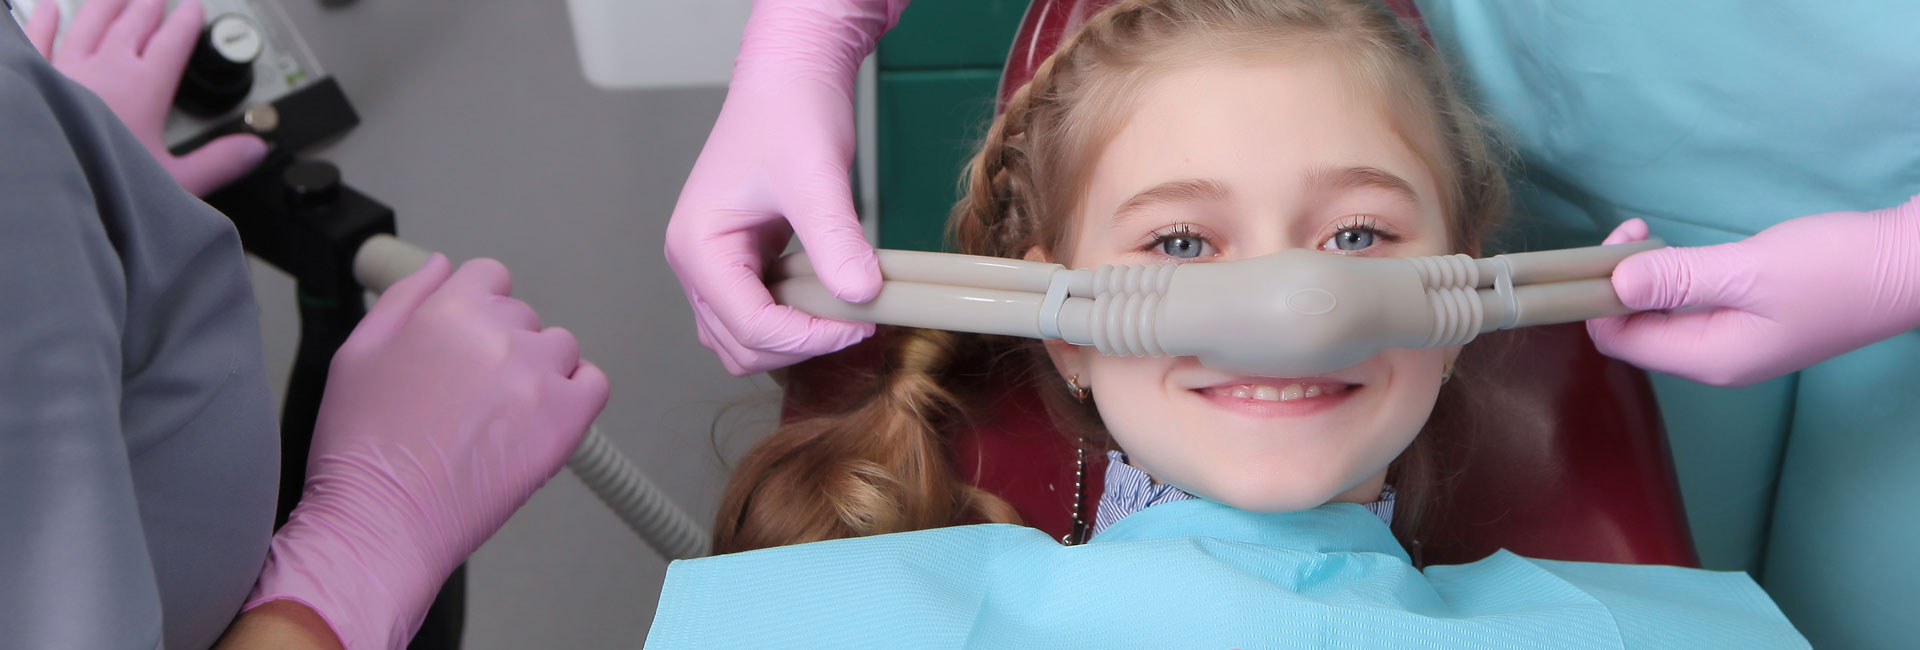 A little girl is comfortable to treat her teeth under superficial sedation.